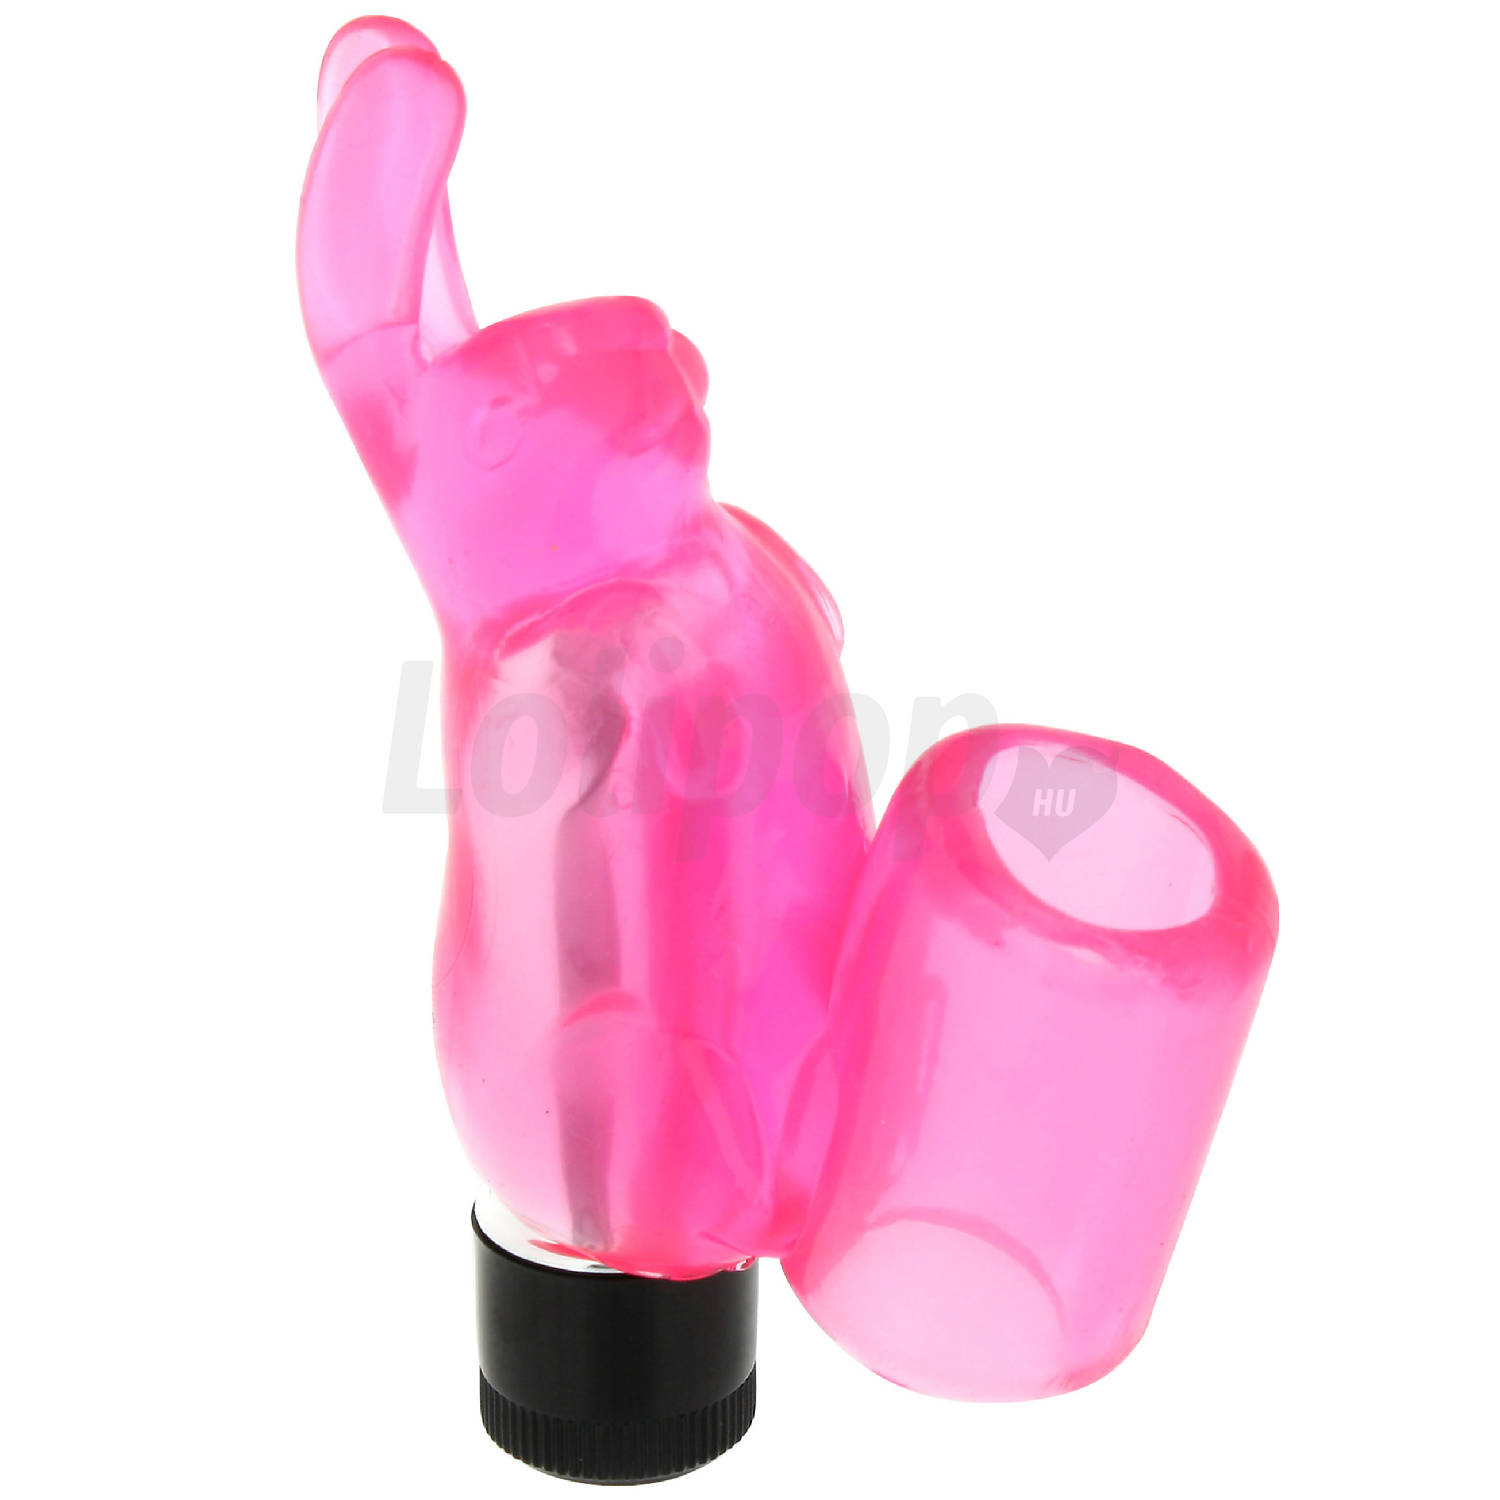 Seven Creations Silicone Rabbit Finger Sleeve